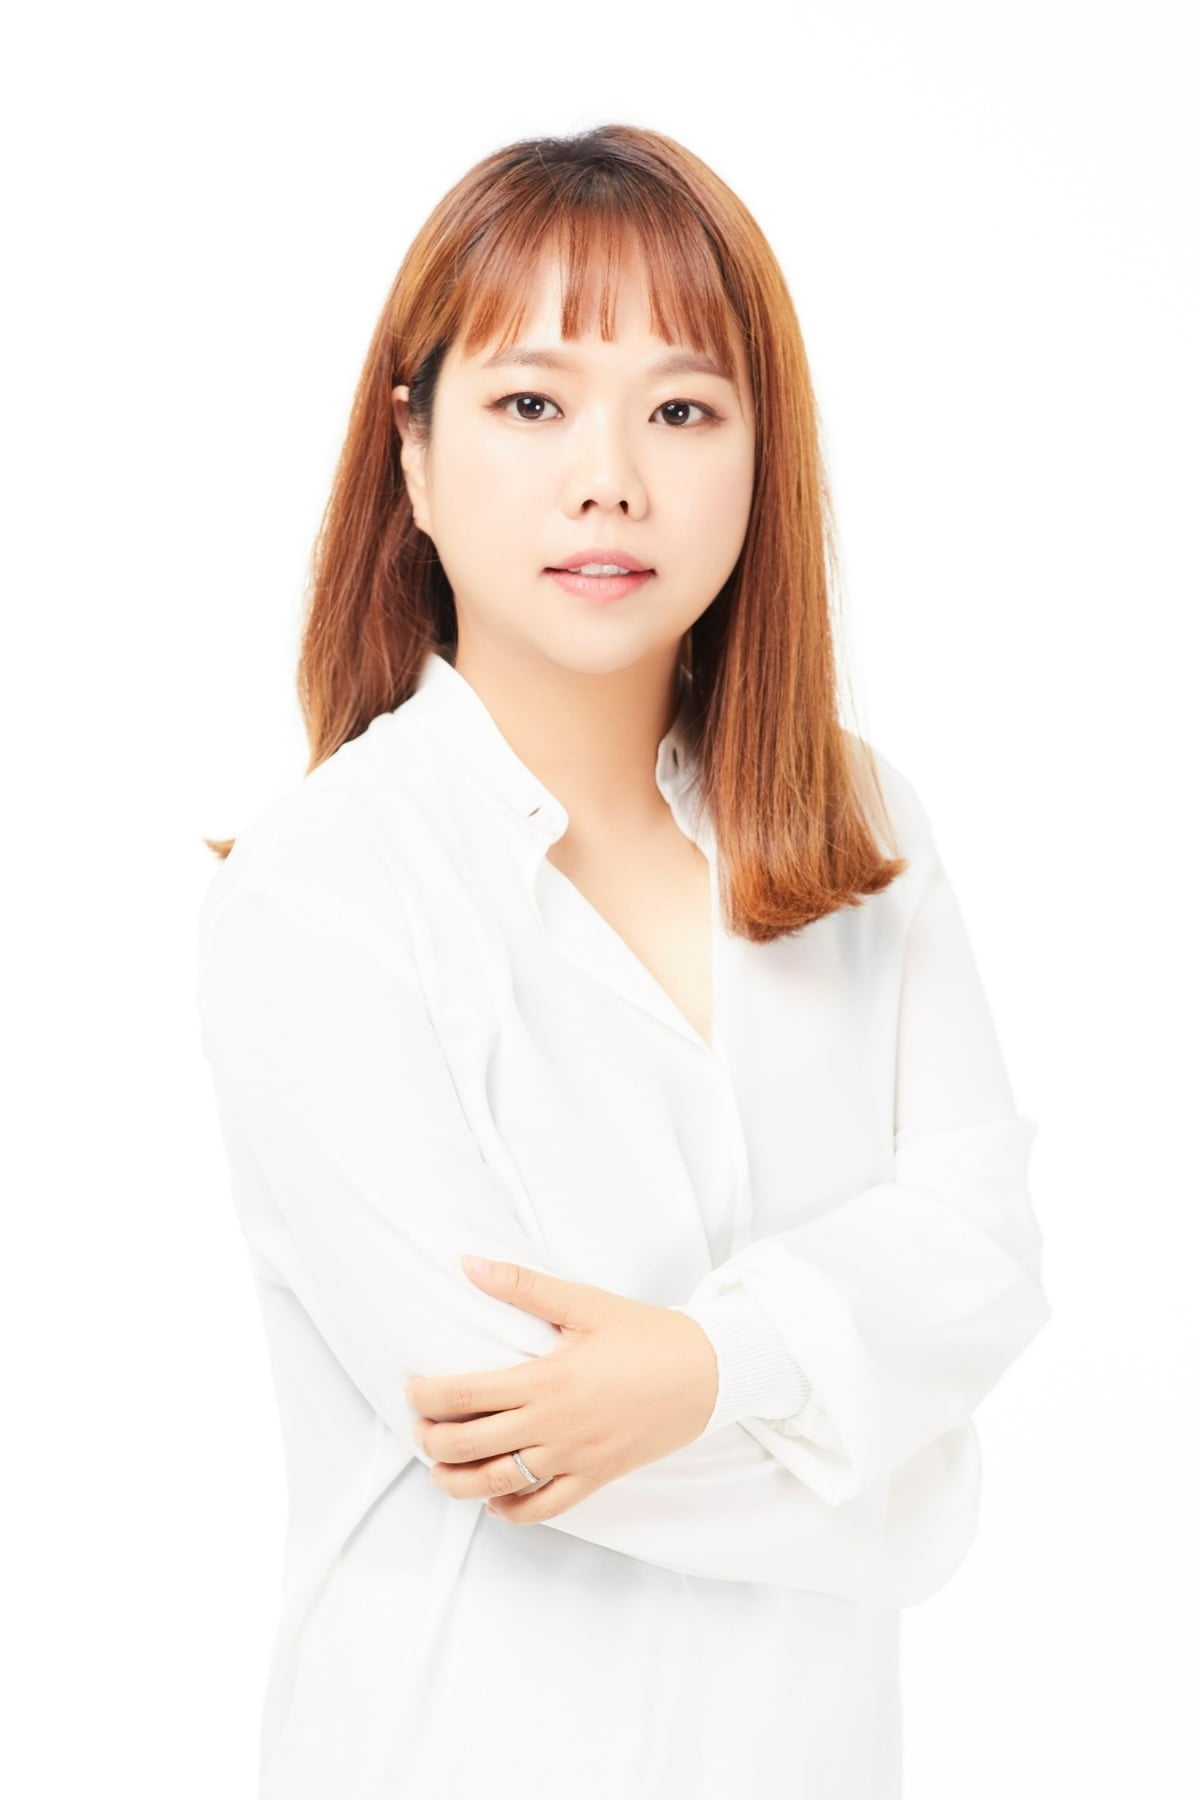 'Nego King' confirmed the production of season 6 and selected Hong Hyun-hee as MC.